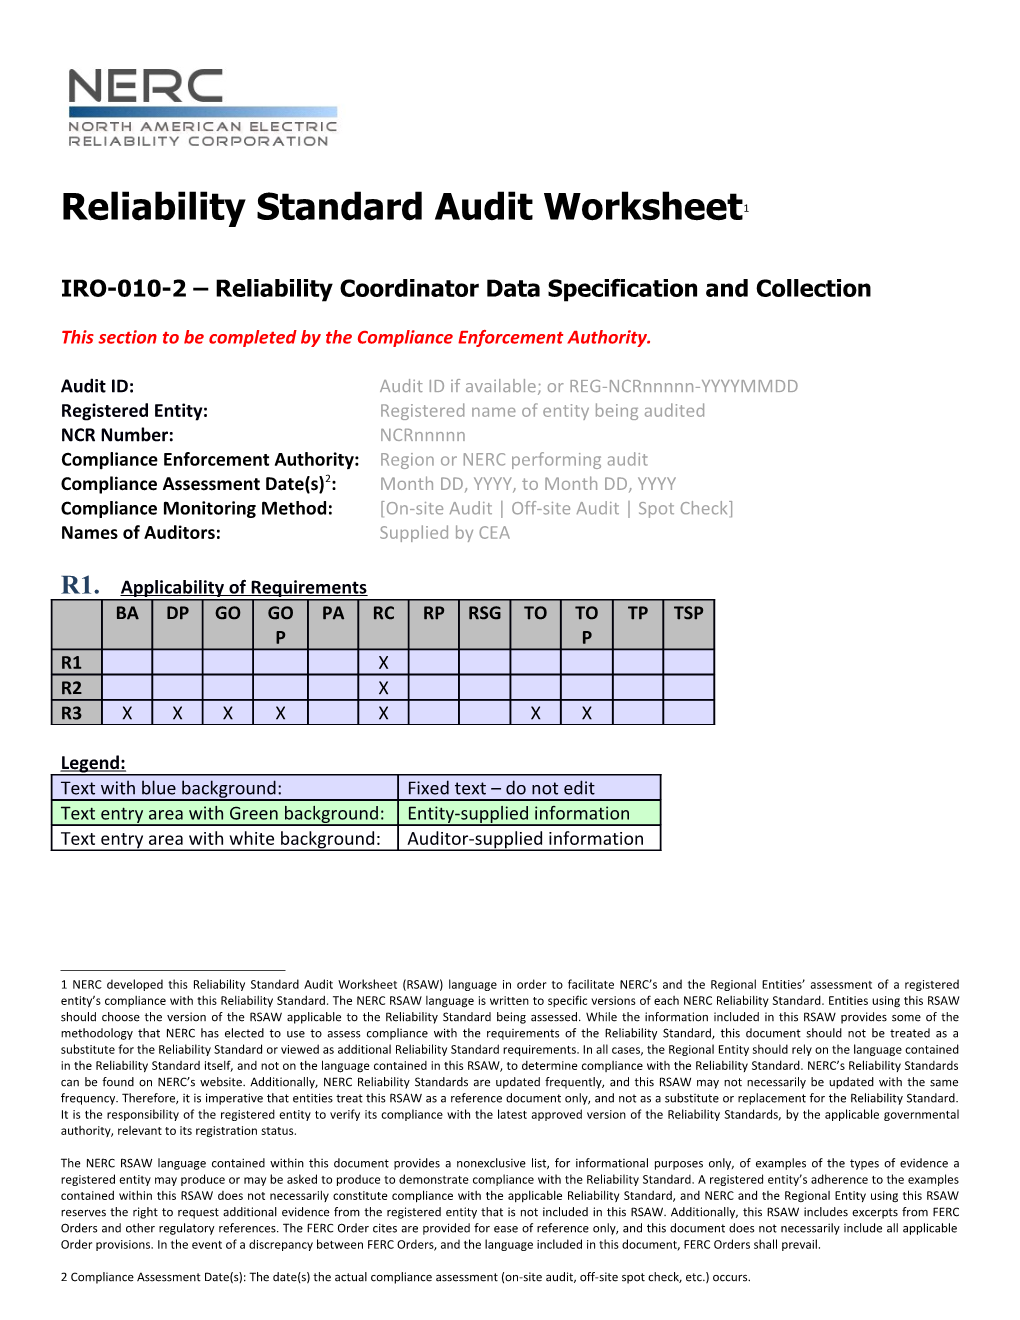 Reliability Coordinator Data Specification and Collection